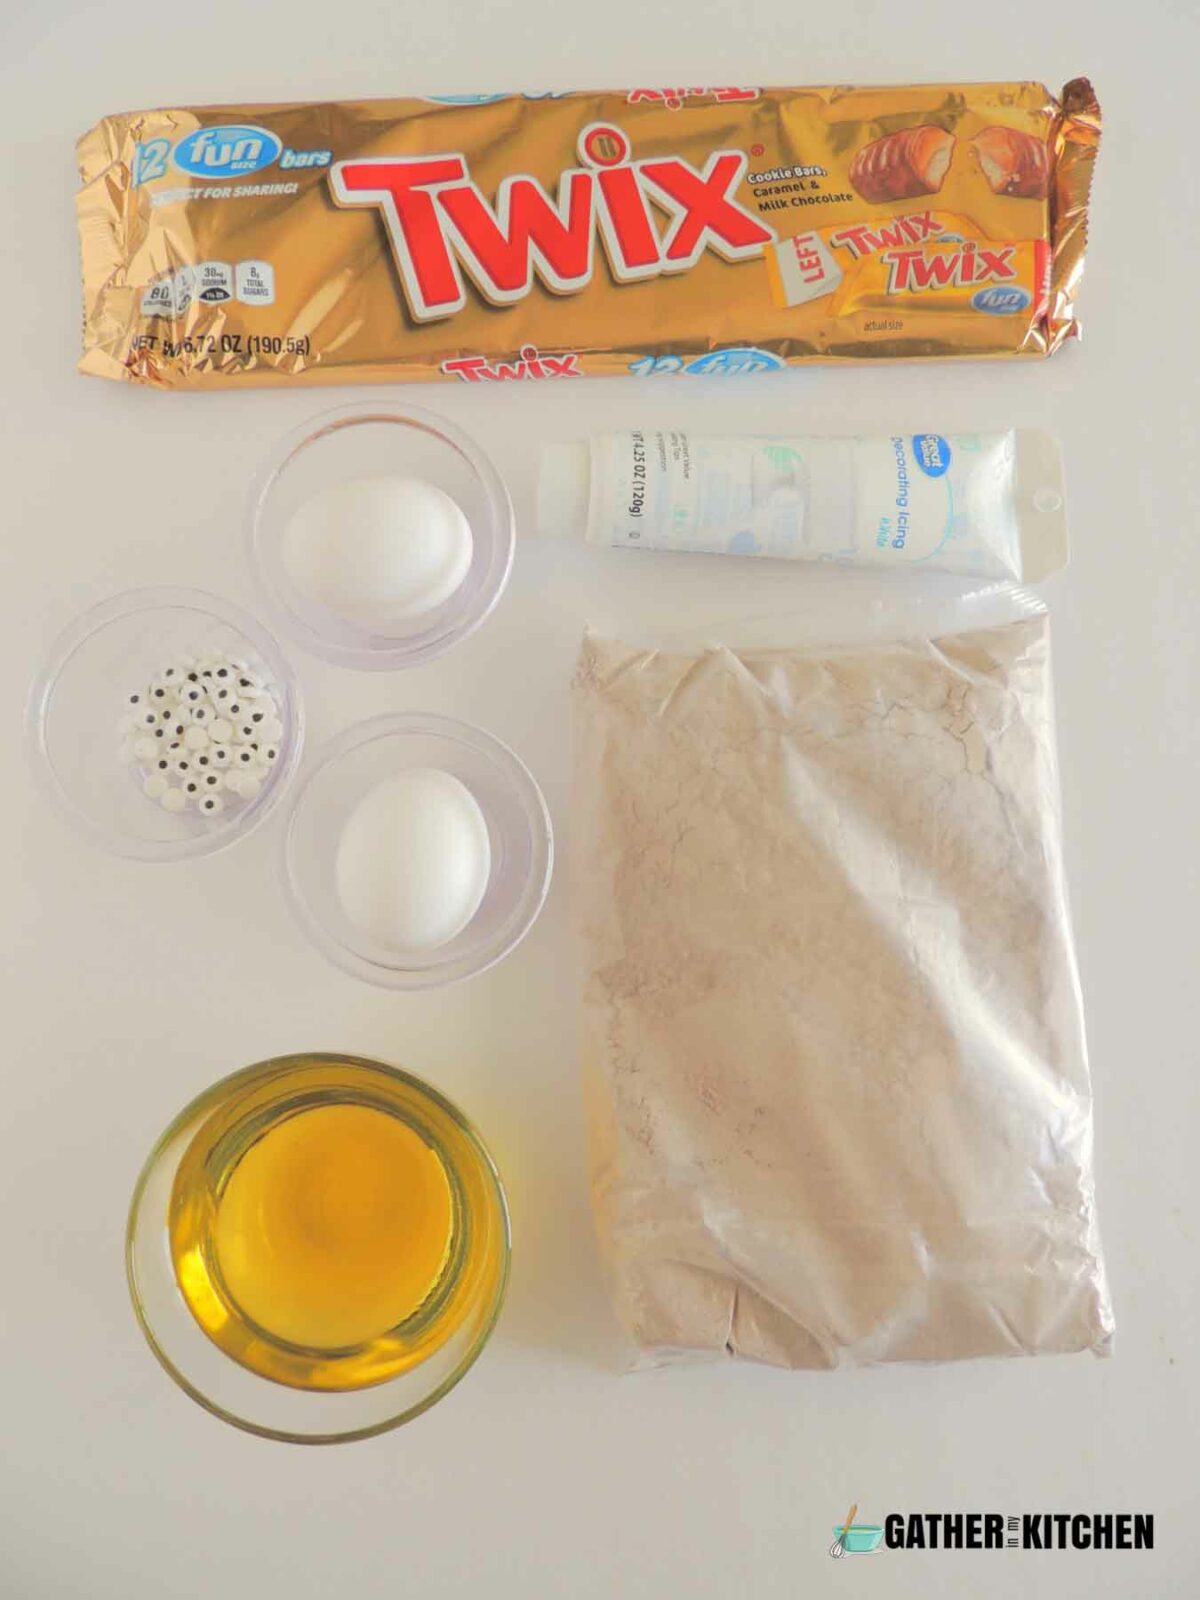 Ingredients: package of Twix, white decorating icing, brownie mix, oil, eggs, edible googly eyes